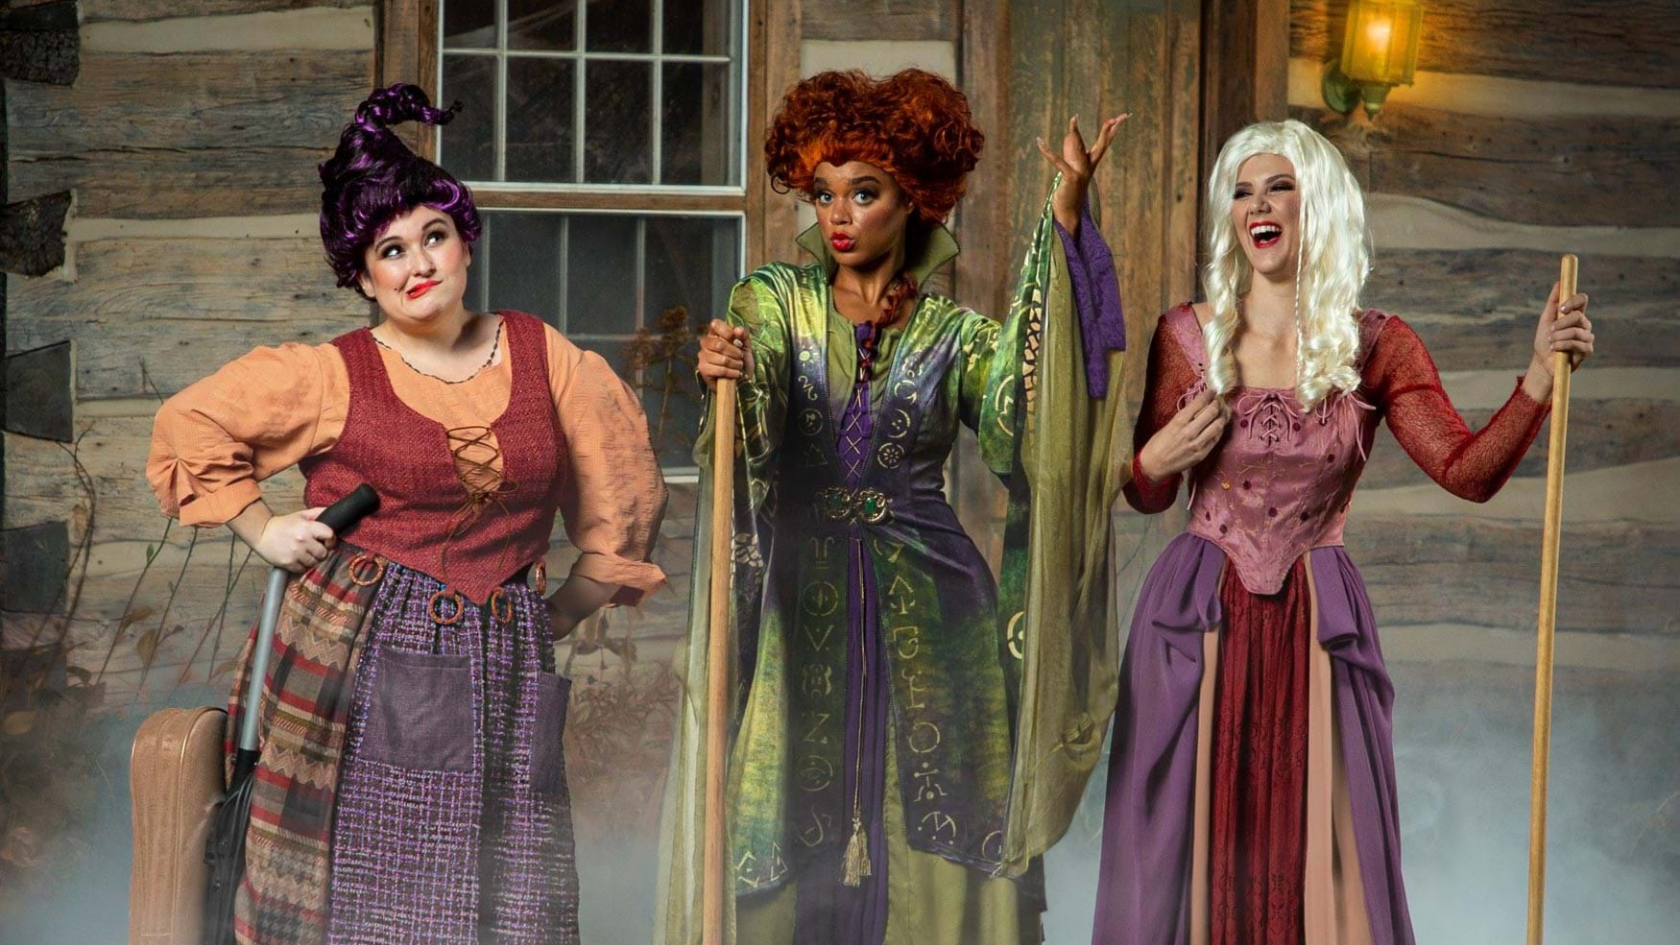 Sanderson Sisters Costumes For Halloween - Mad Halloween